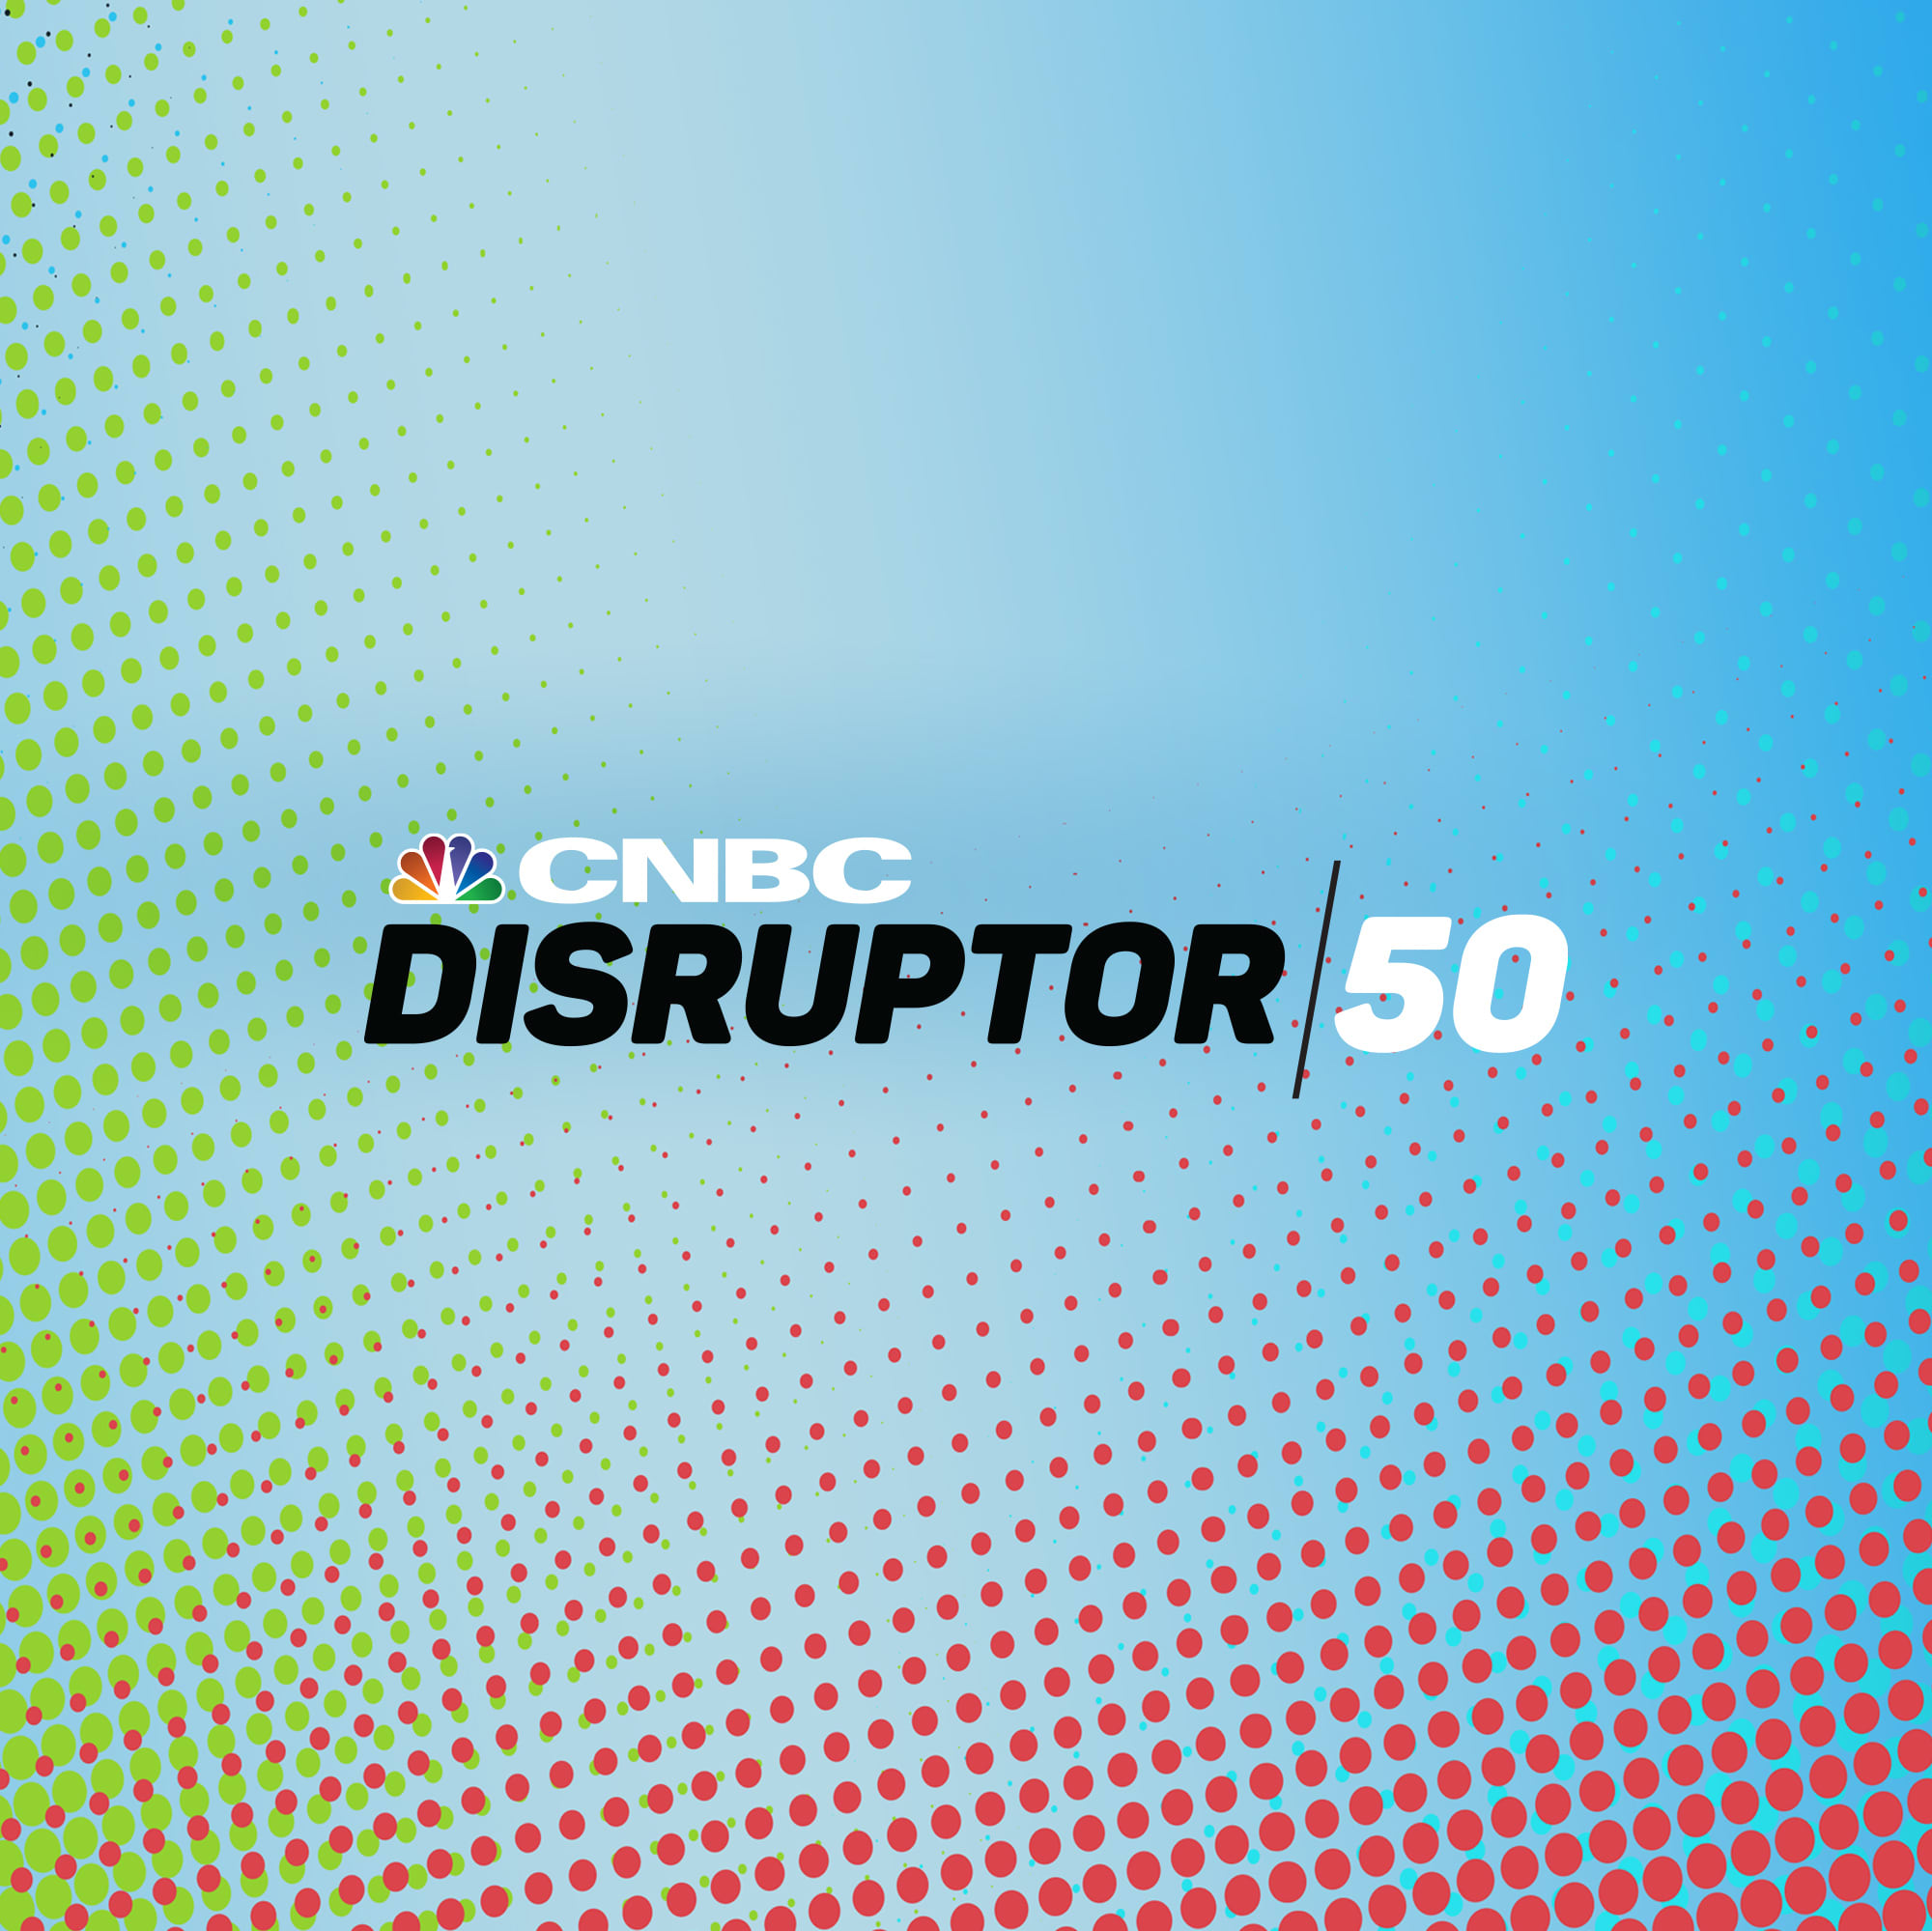 The 2022 CNBC Disruptor 50 list: Meet the next generation of Silicon Valley